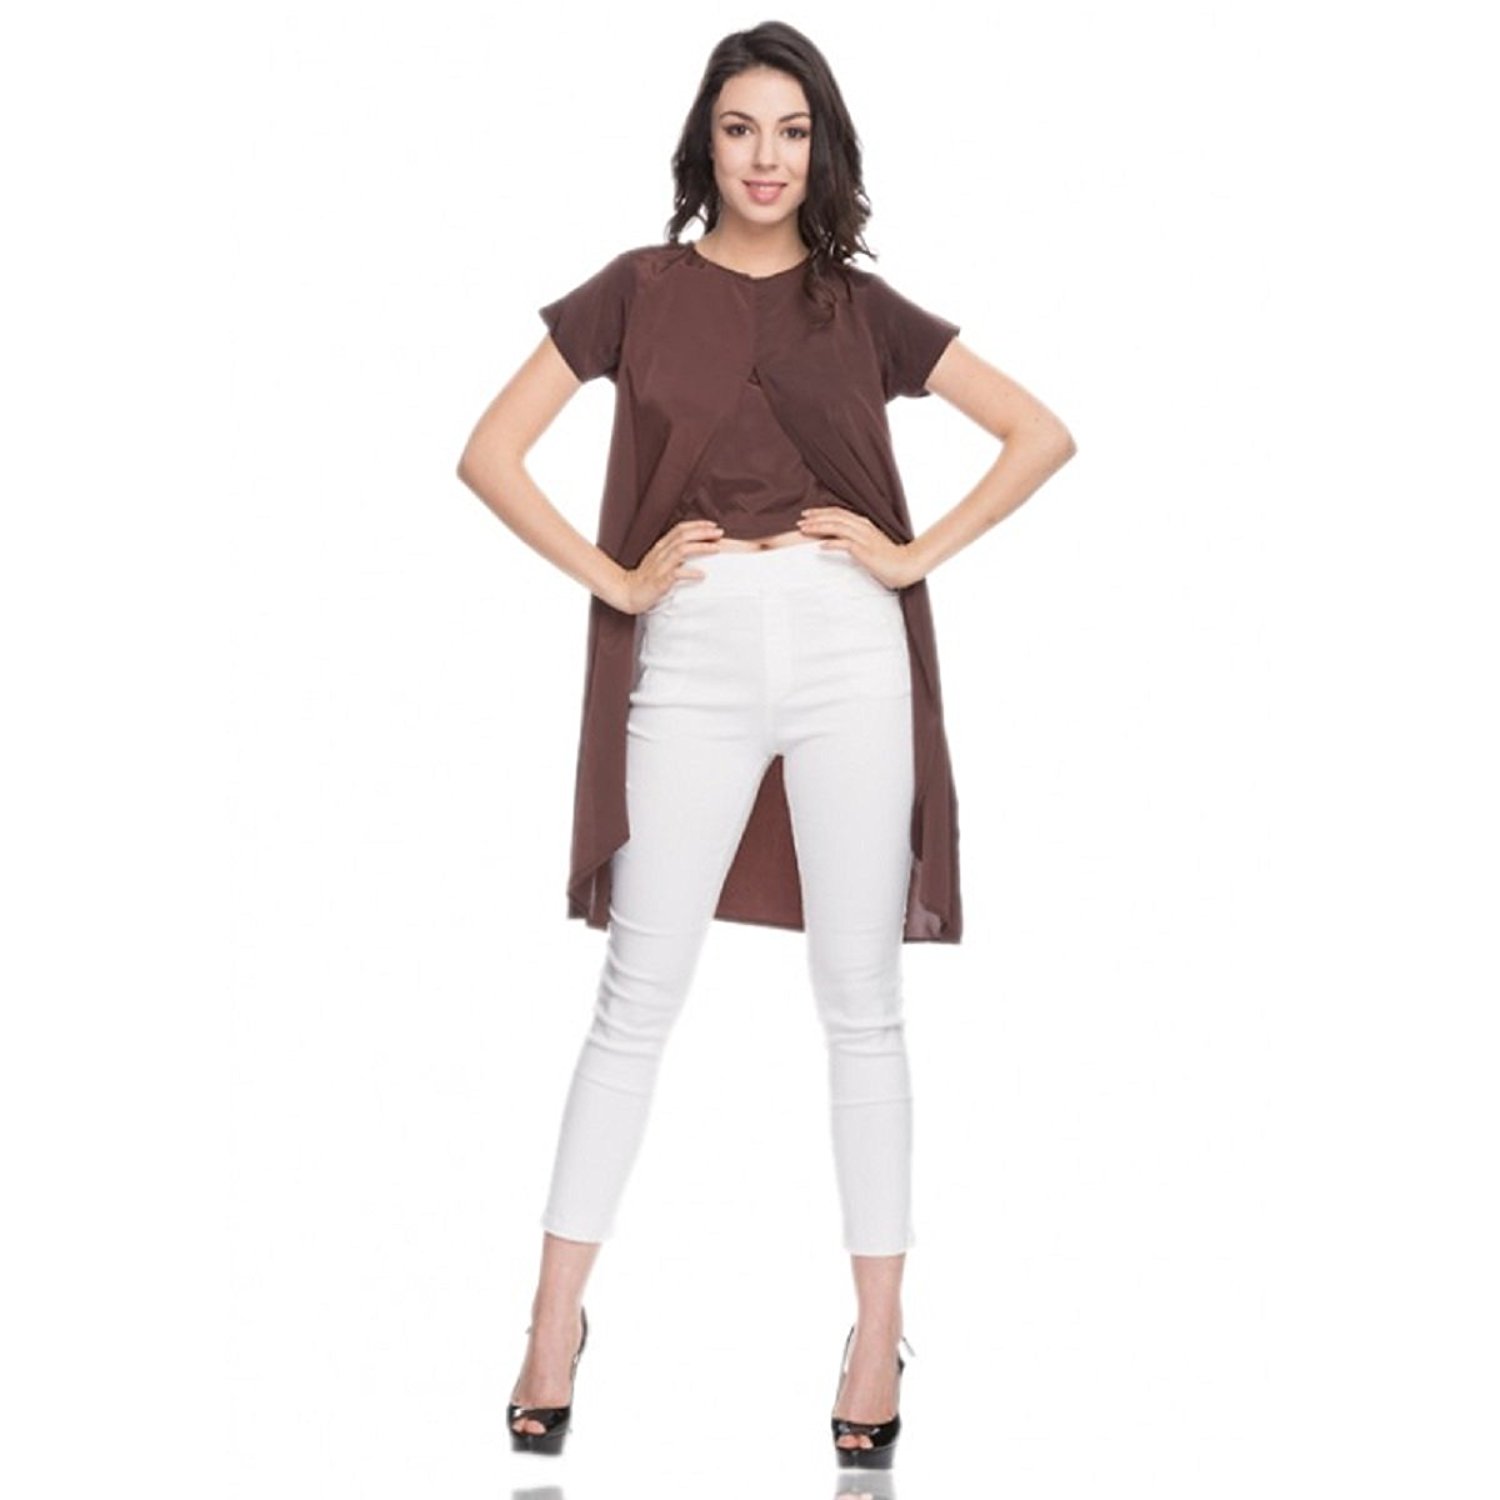 Amazon: The H & K Clothing’s Women’s Brown Cape Top at Rs 100 Only